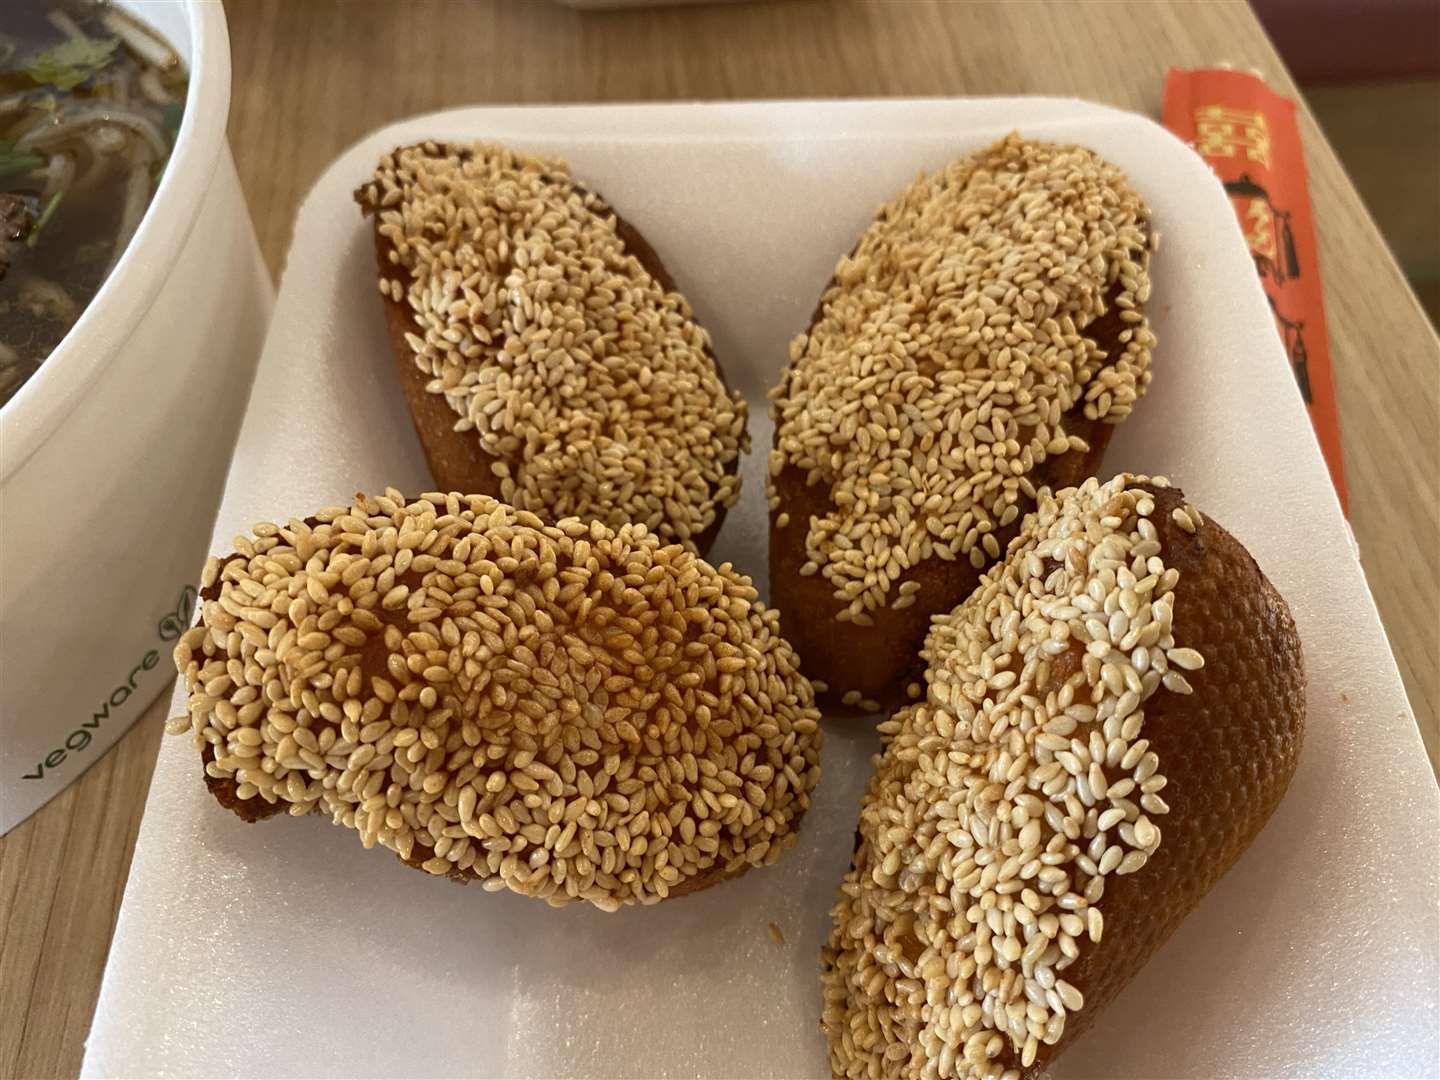 The crispy sesame prawn toast, costing £4.95, was a little on the small side